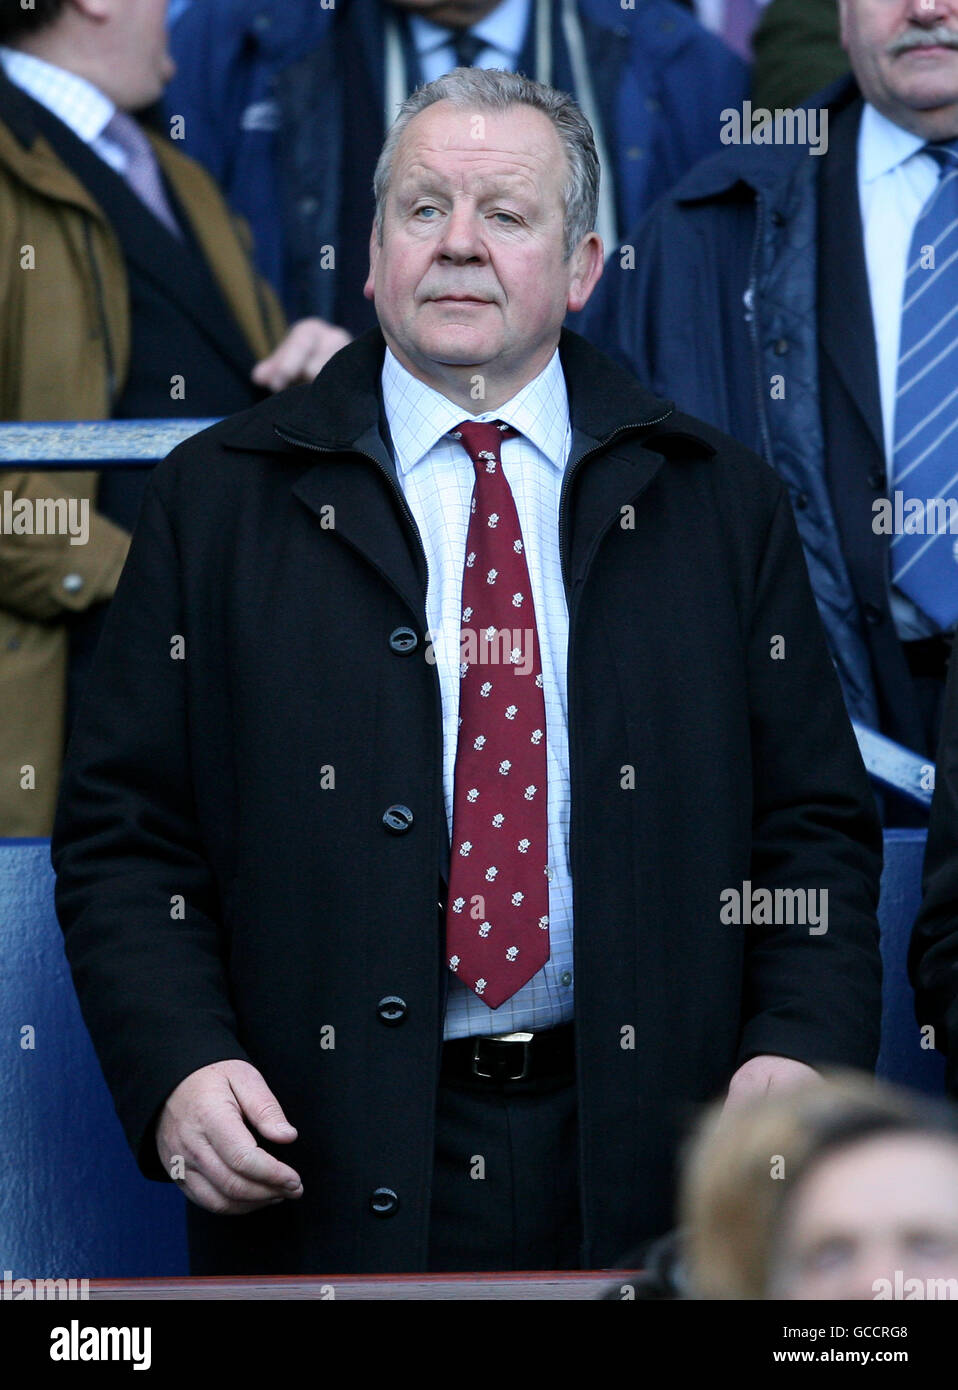 Rugby Union - RBS 6 Nations Championship 2010 - Ecosse / Angleterre - Murrayfield. Bill Beaumont, ancien joueur d'Angleterre Banque D'Images